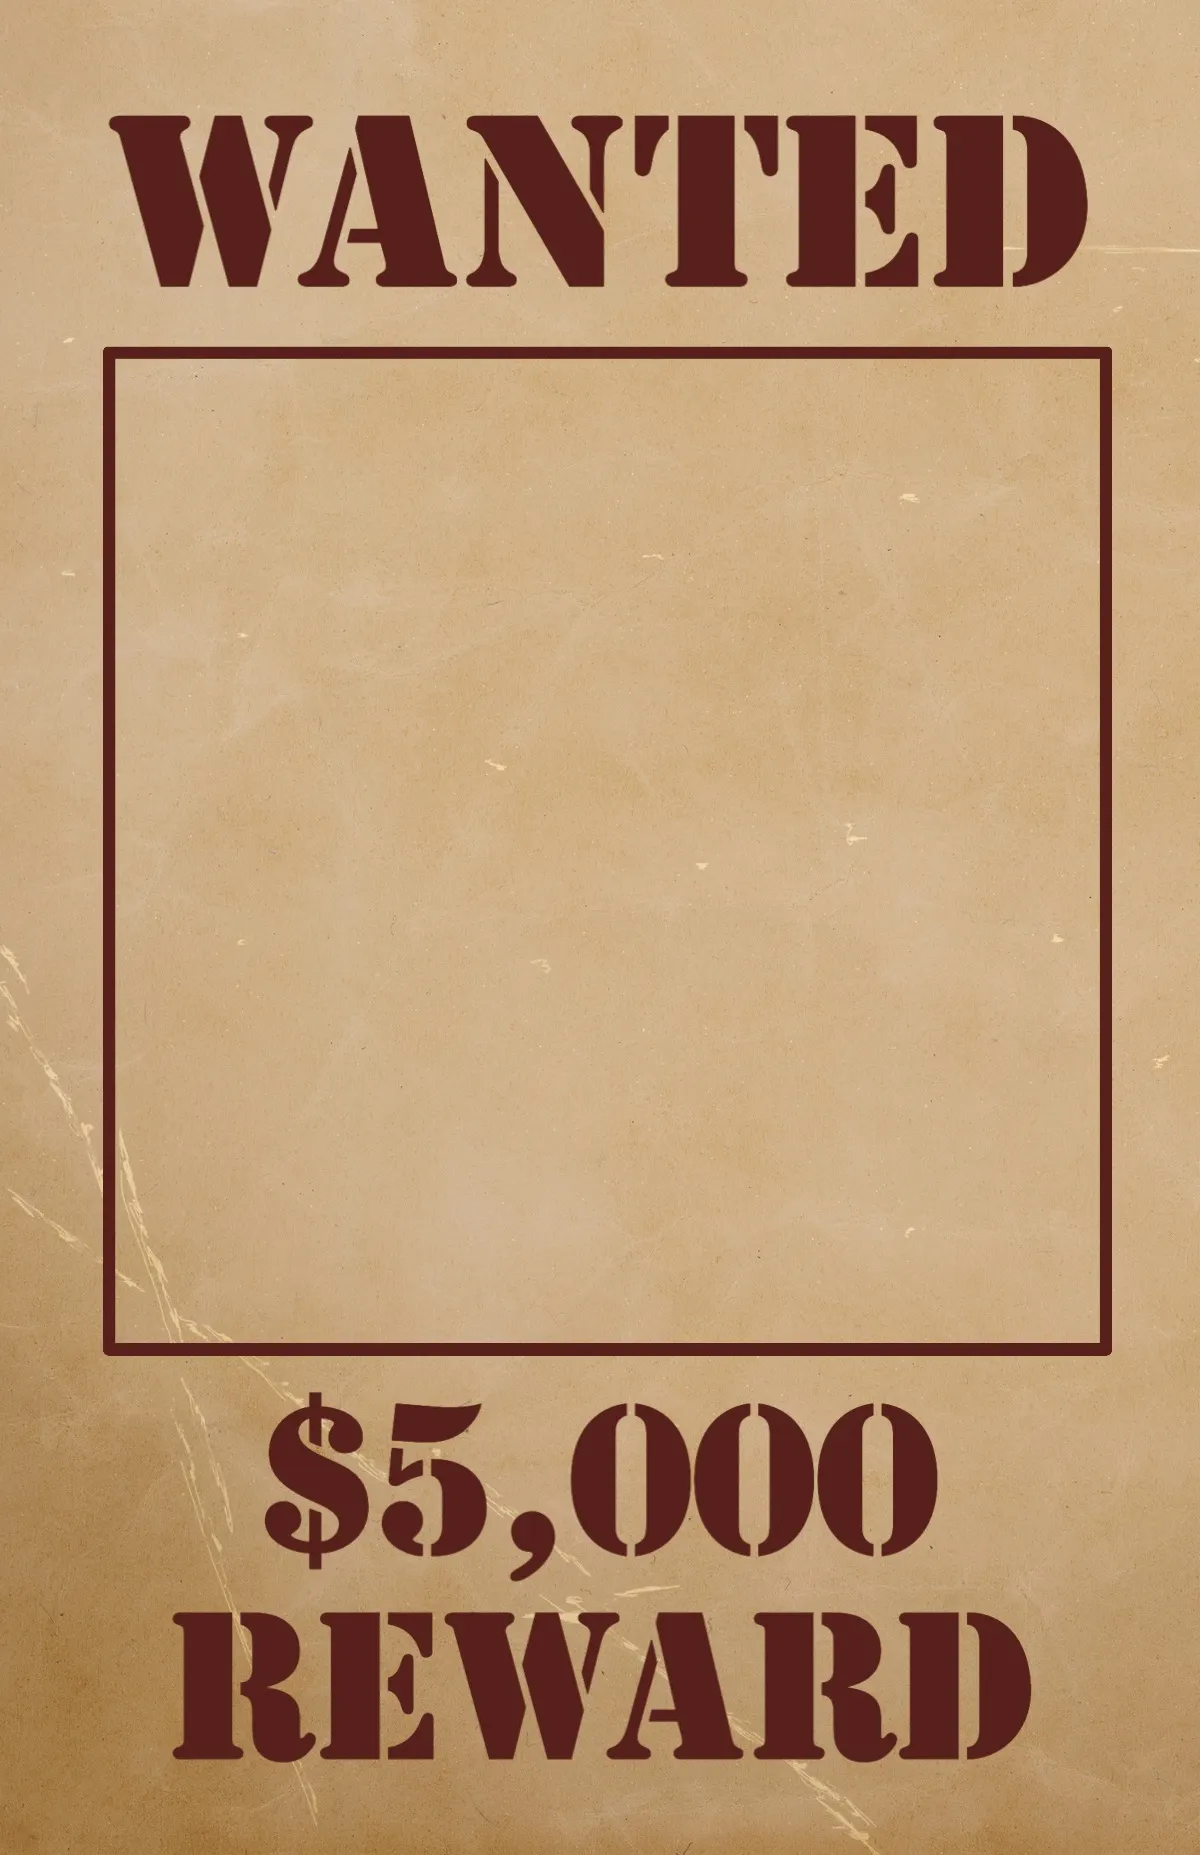 Brown Textured Background Wanted Poster